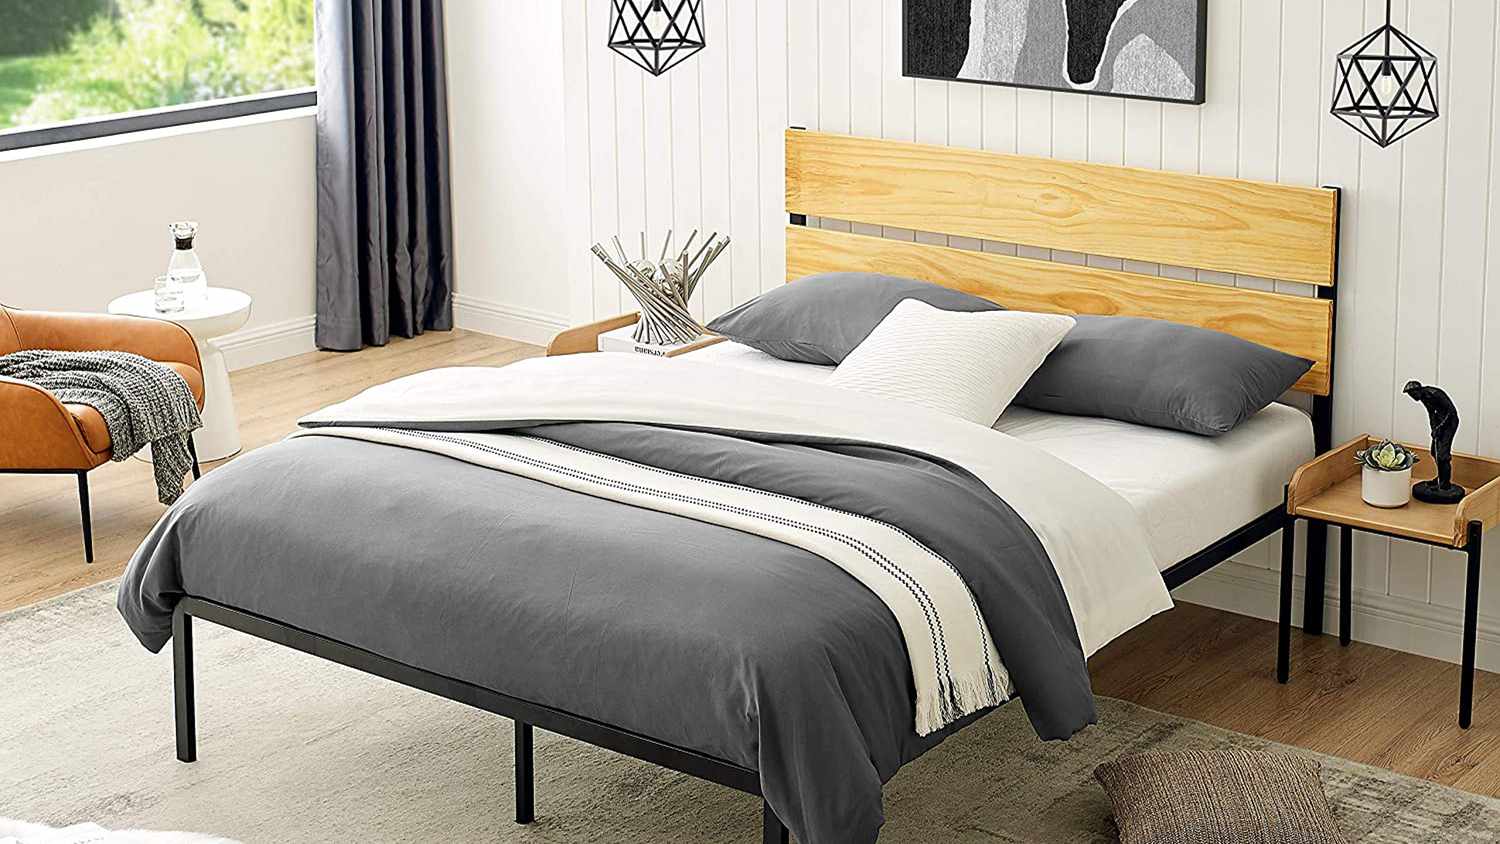 Amazon Basics Arielle Metal and Wood Platform Bed with Headboard